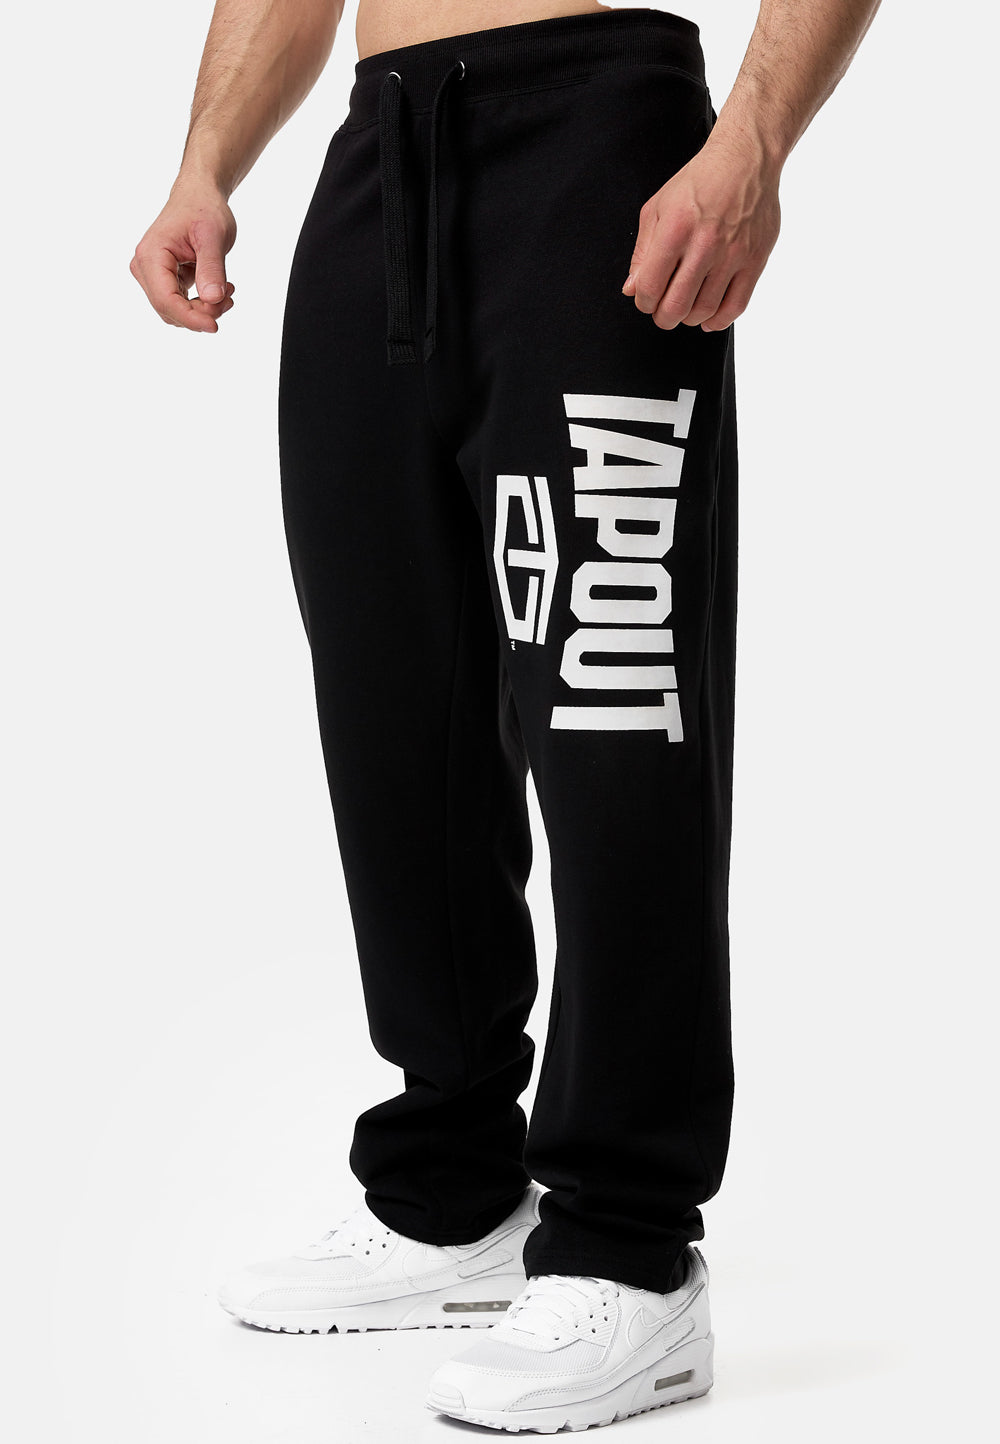 ACTIVE BASIC JOGGER – Tapout